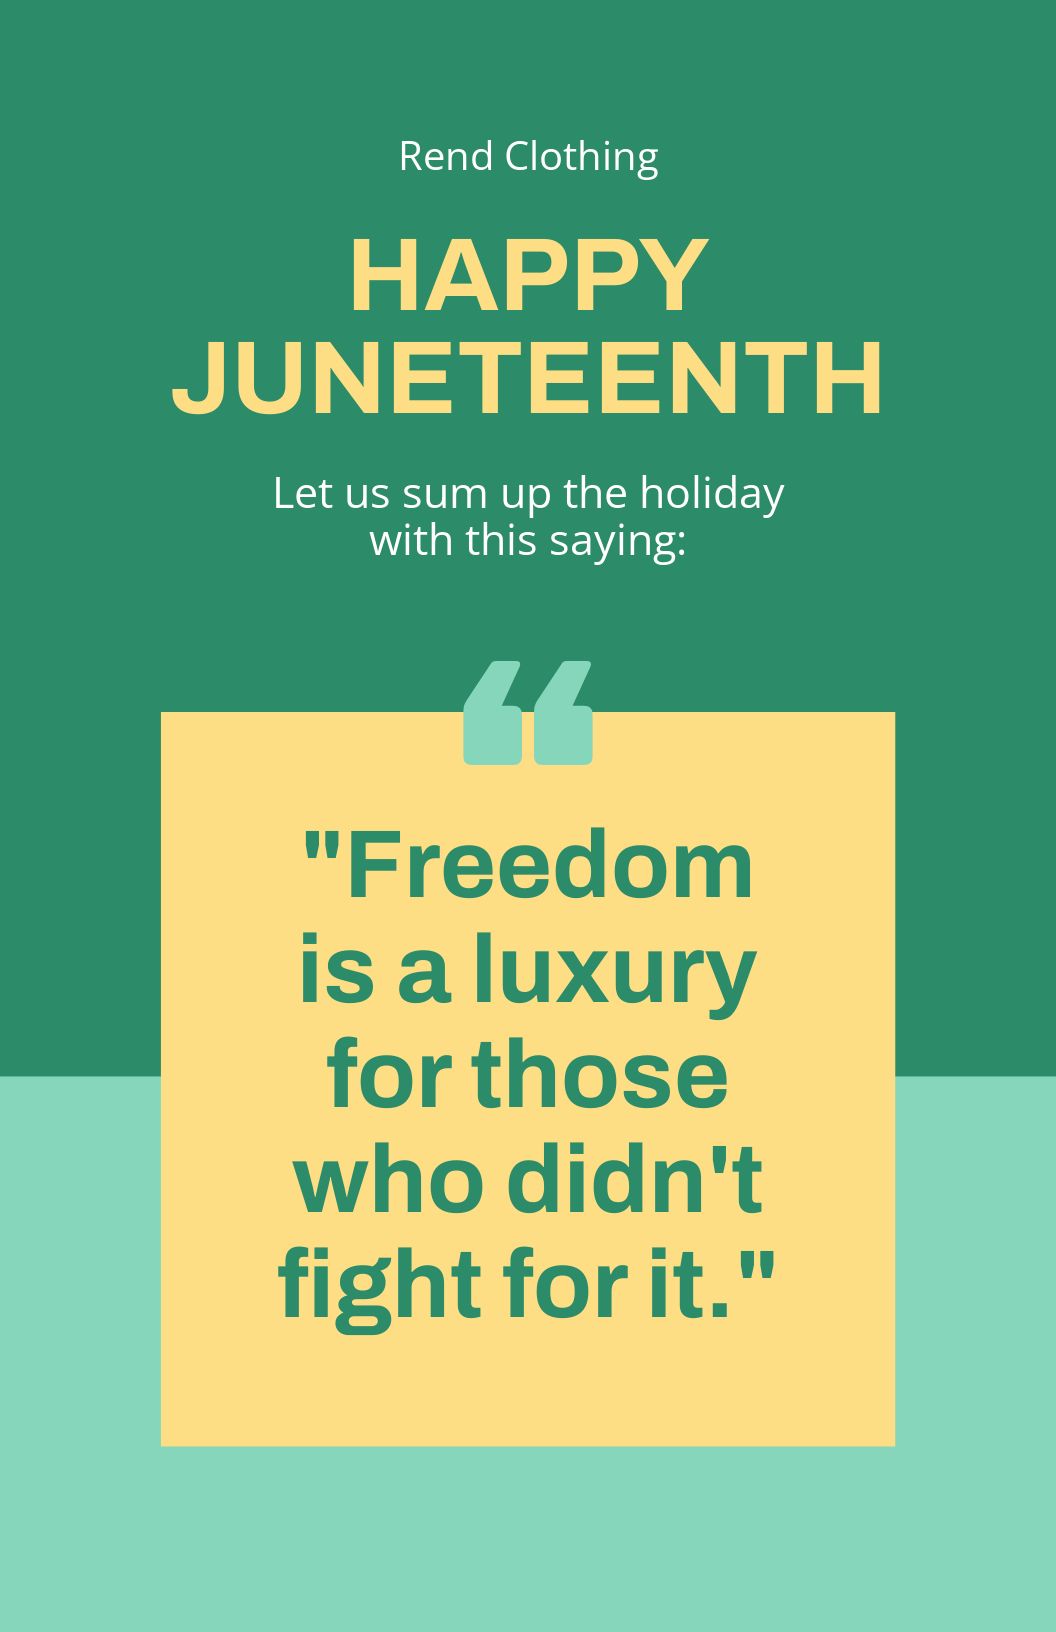 Free Juneteenth Saying Poster in Word, Google Docs, Illustrator, PSD, Apple Pages, Publisher, JPG